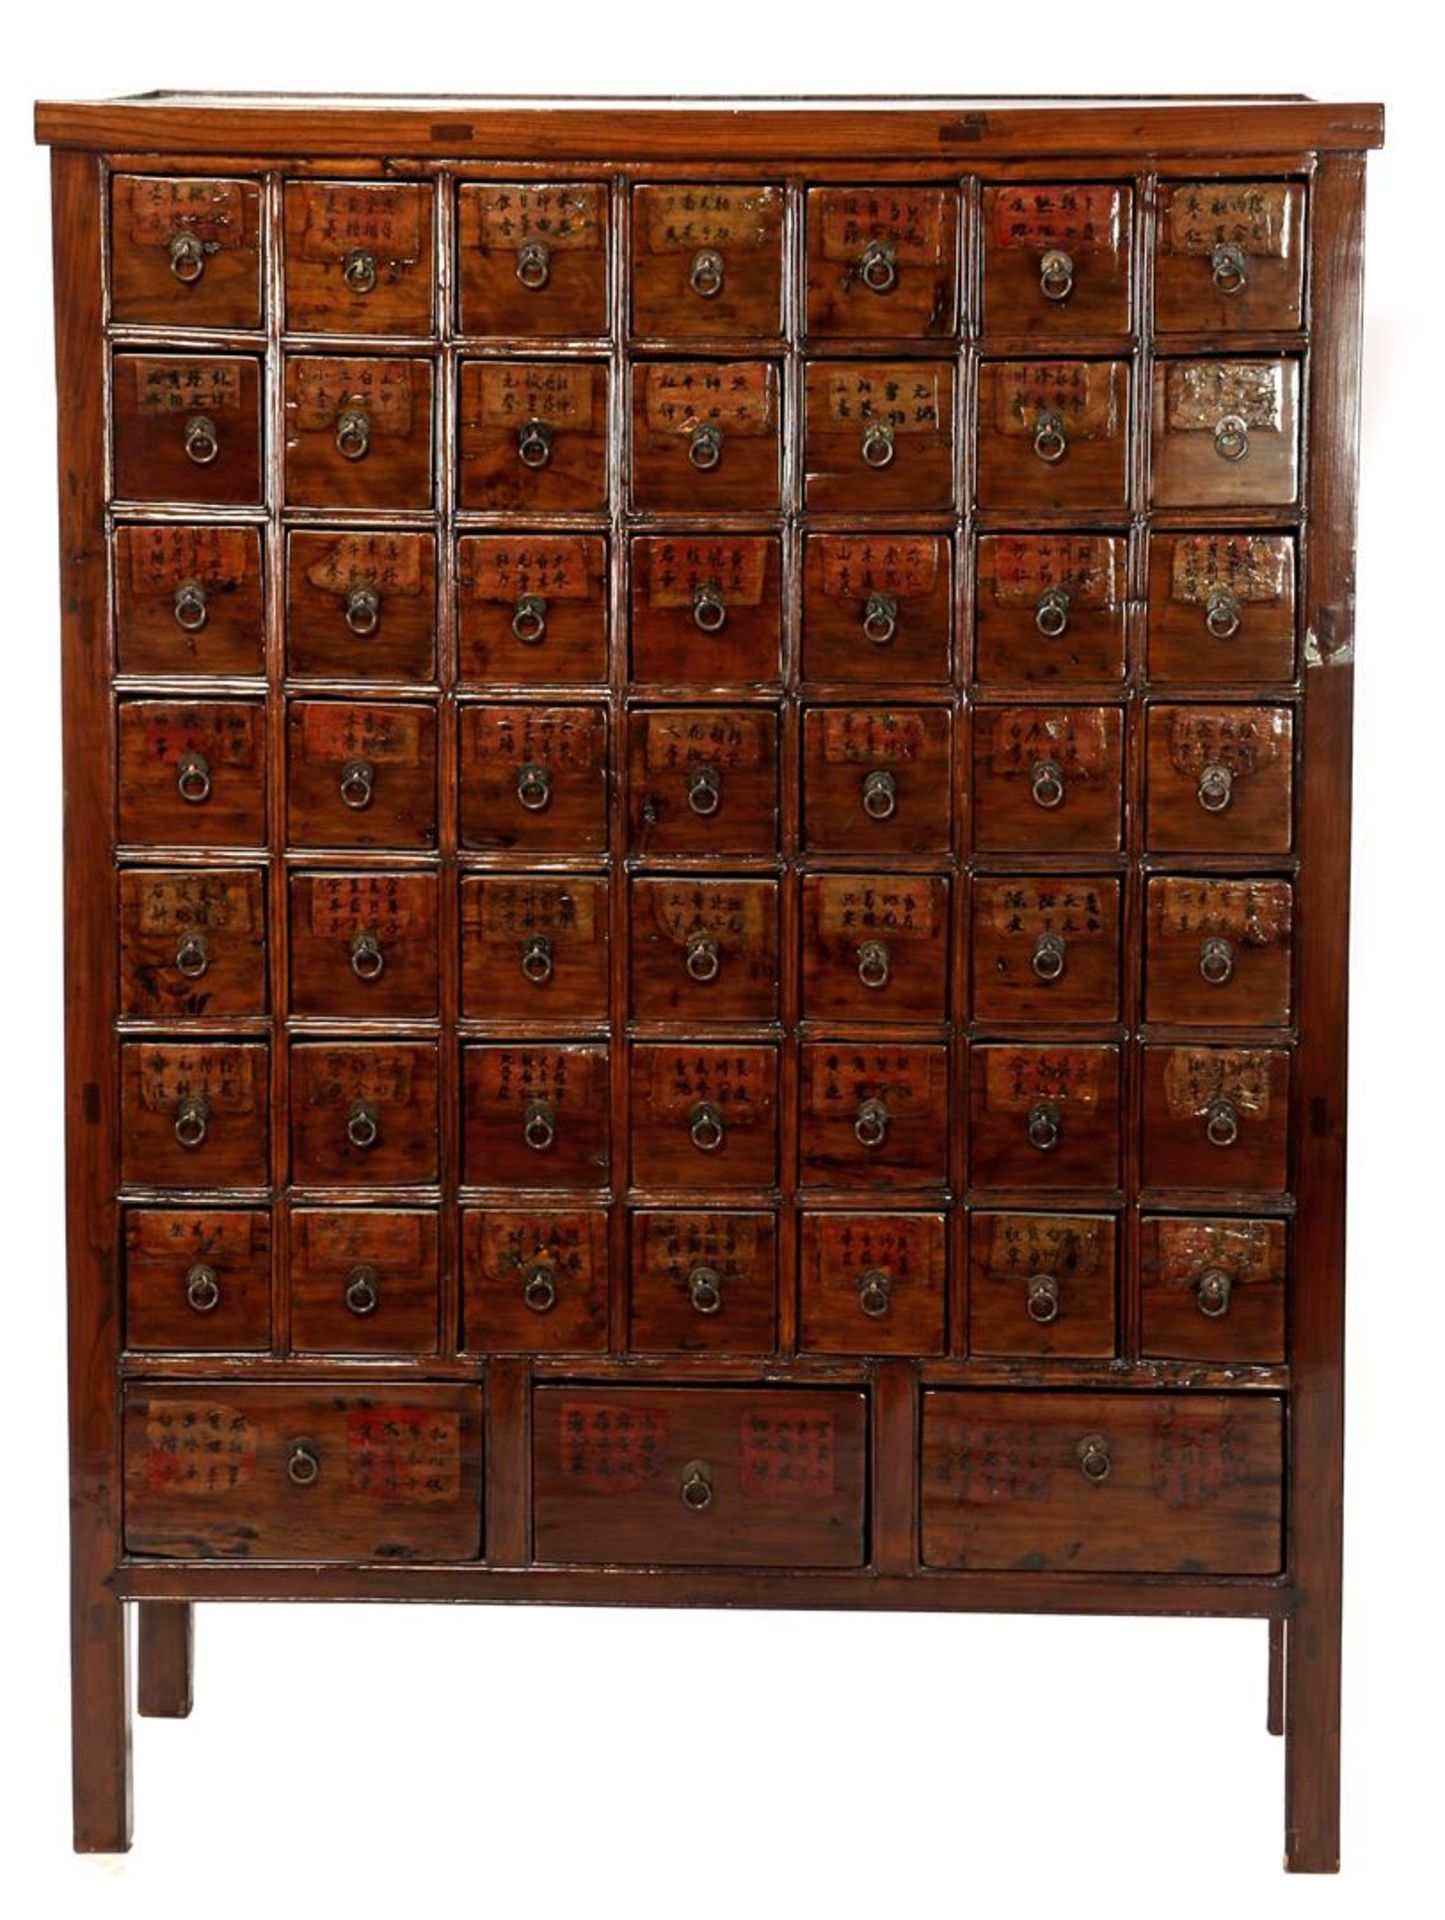 Teak Chinese chest of drawers with inscriptions, 155 cm high, 115 cm wide and 45 cm deep